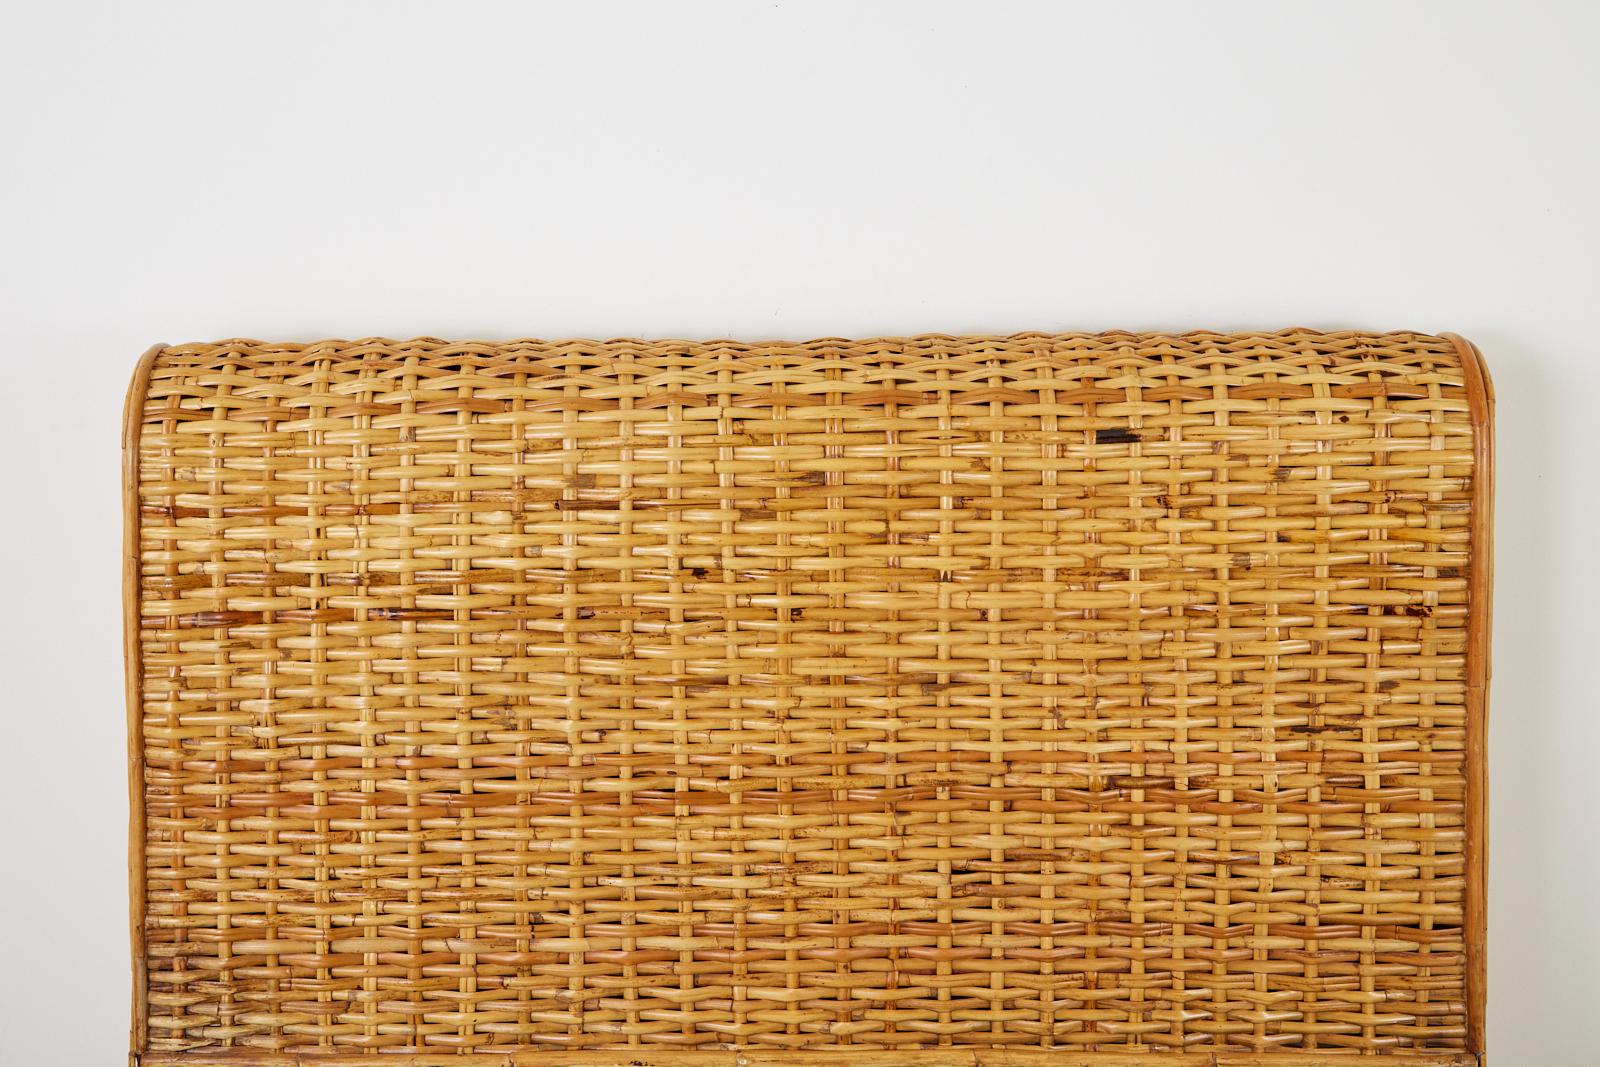 Ralph Lauren Home Collection Woven Rattan Wicker Bed For Sale 2